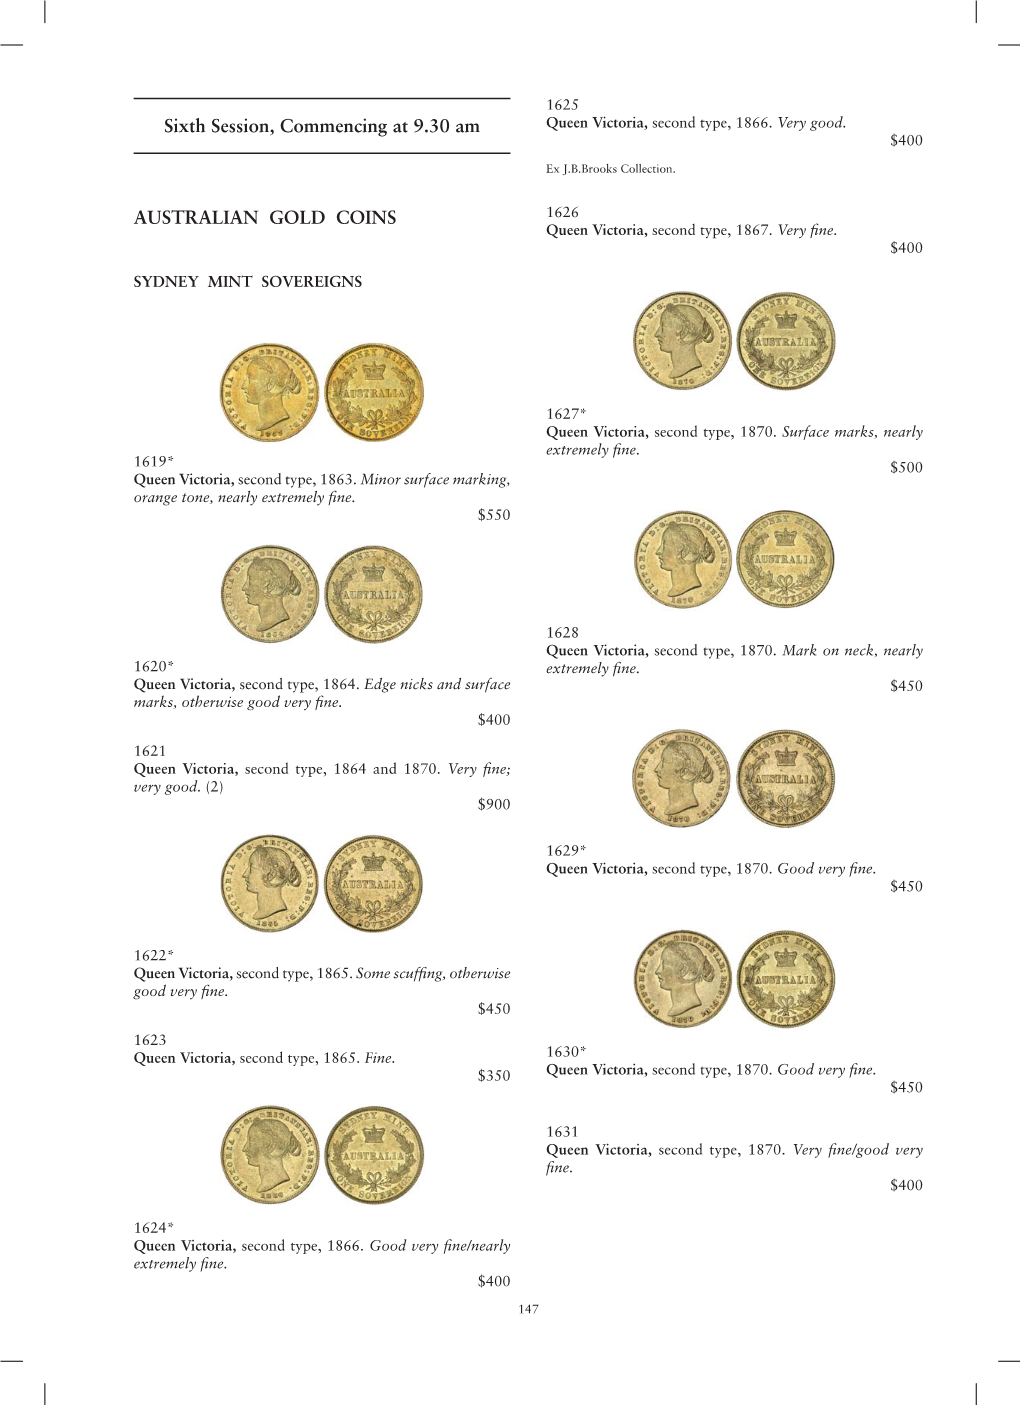 Sixth Session, Commencing at 9.30 Am AUSTRALIAN GOLD COINS